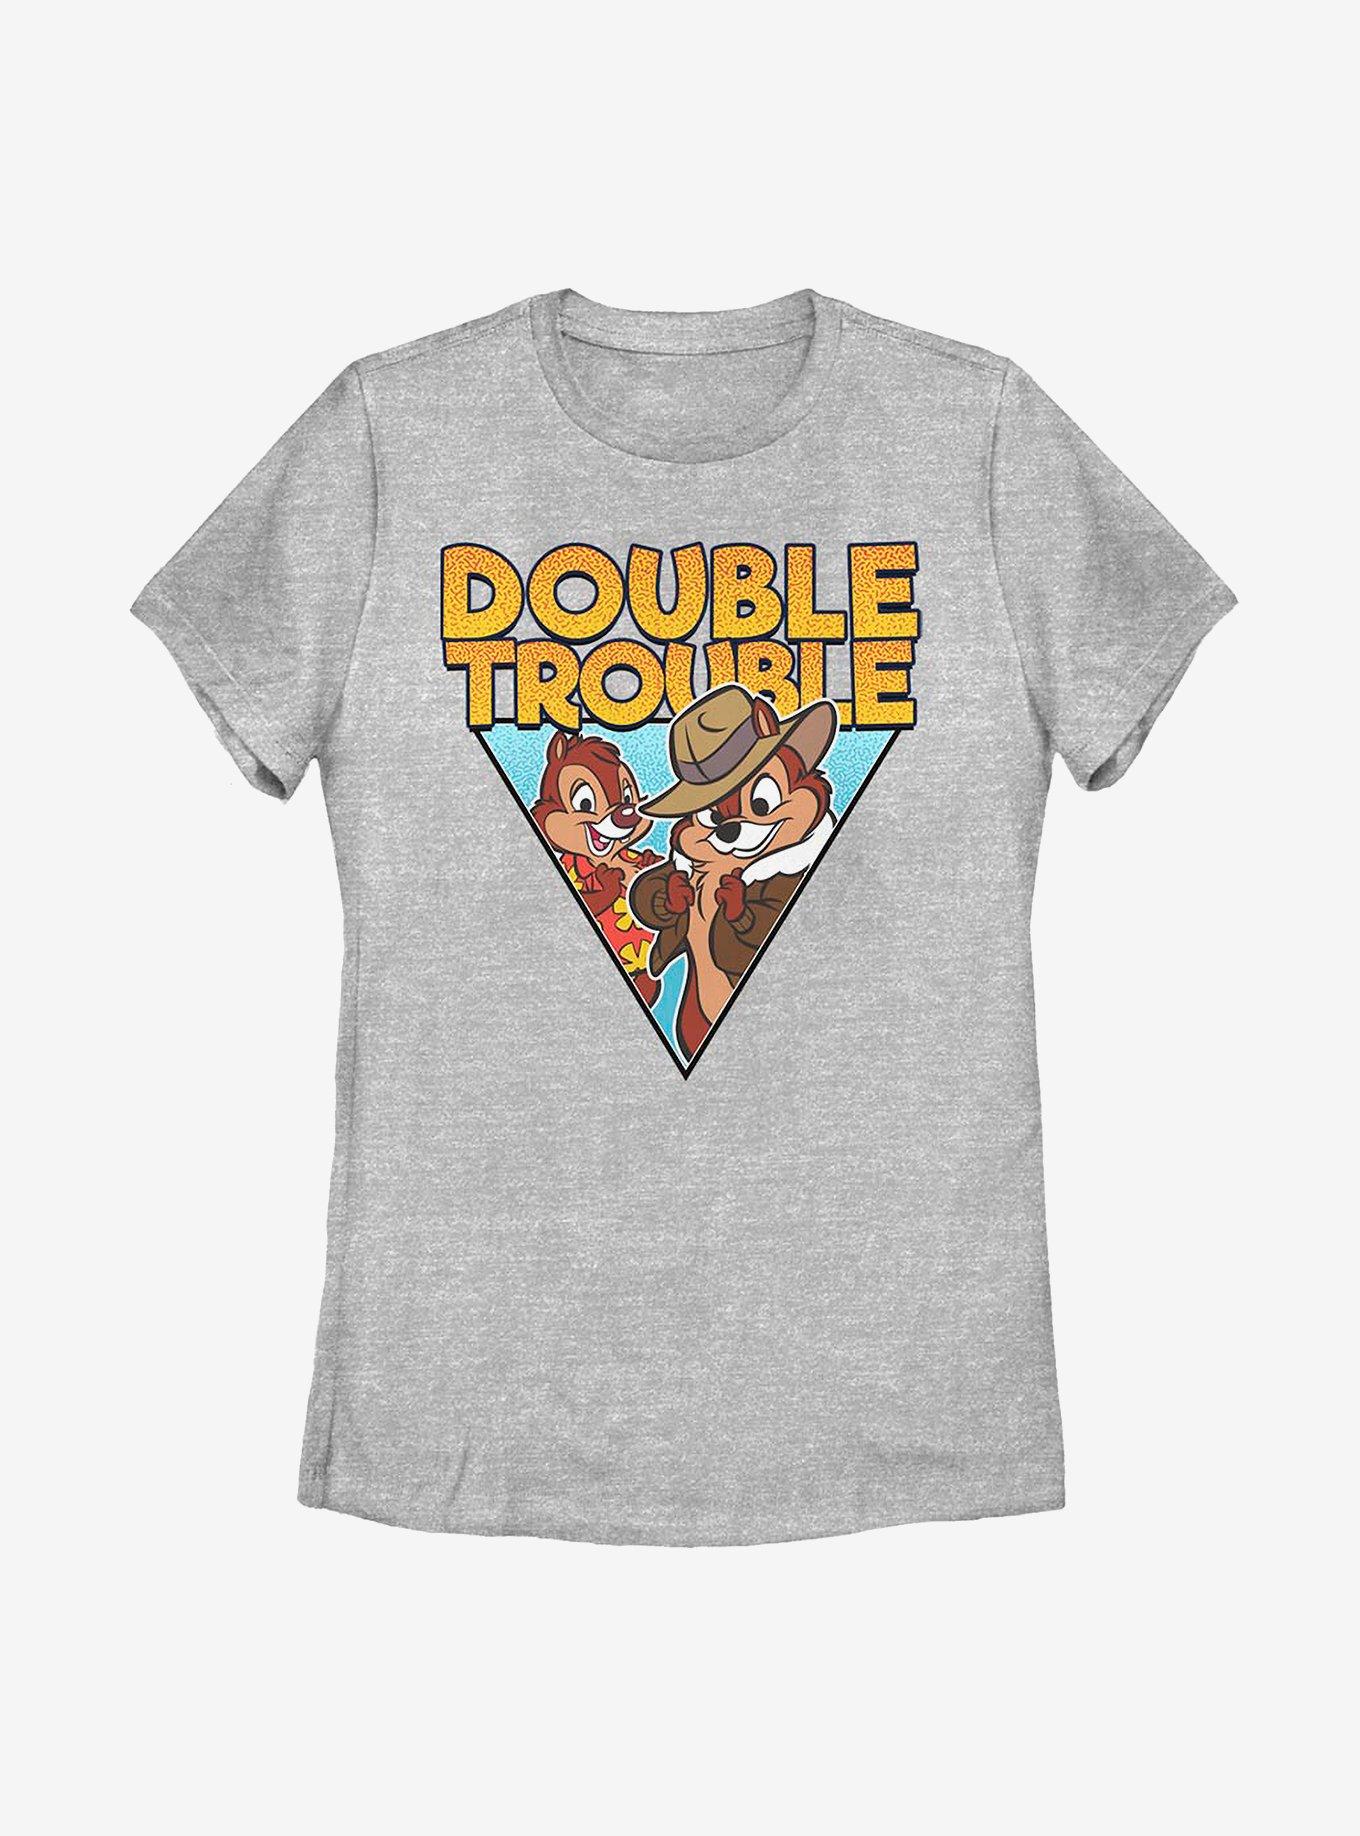 Disney Chip And Dale Rescue Rangers Buddy Tee L Womens T-Shirt, ATH HTR, hi-res